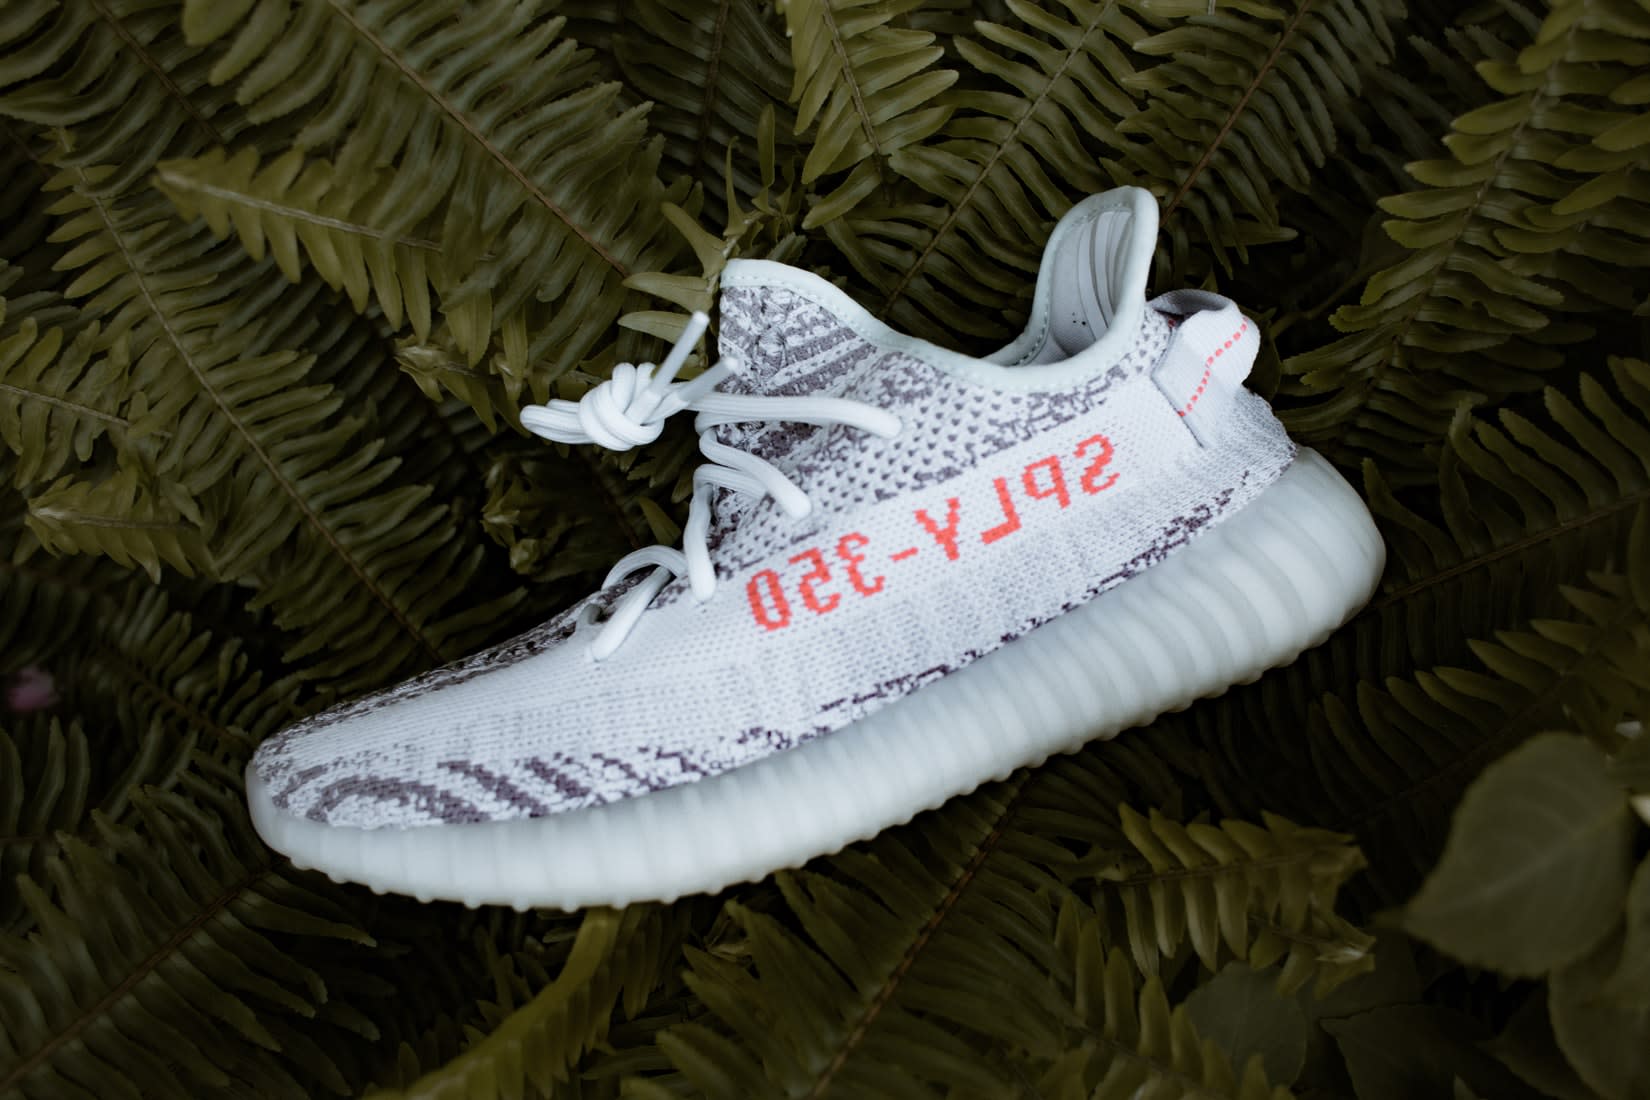 Yeezy Size Guide - How do they fit?